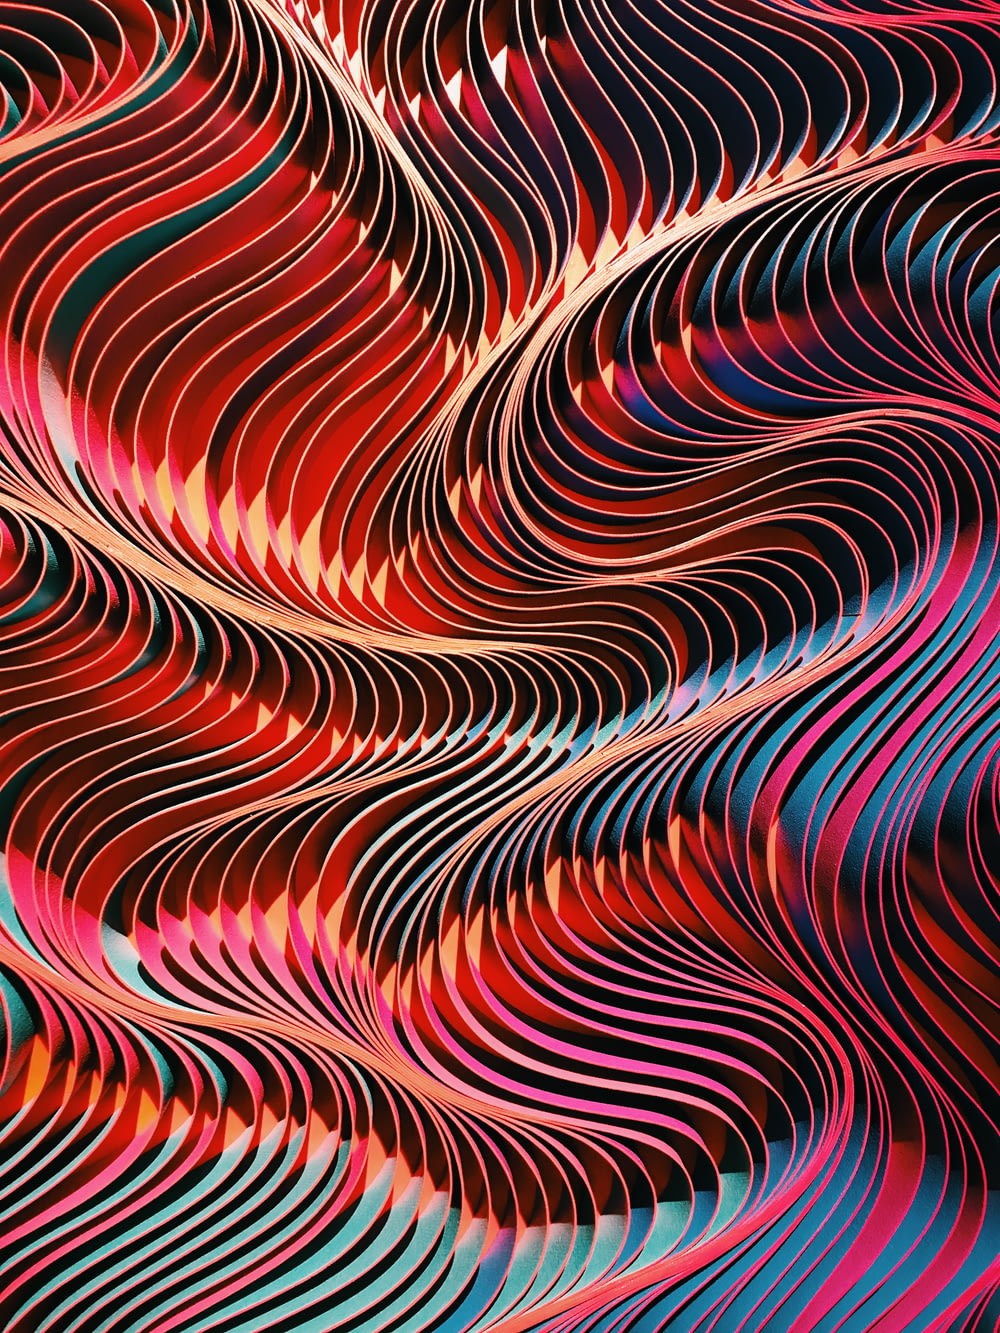 multicolored abstract illustration